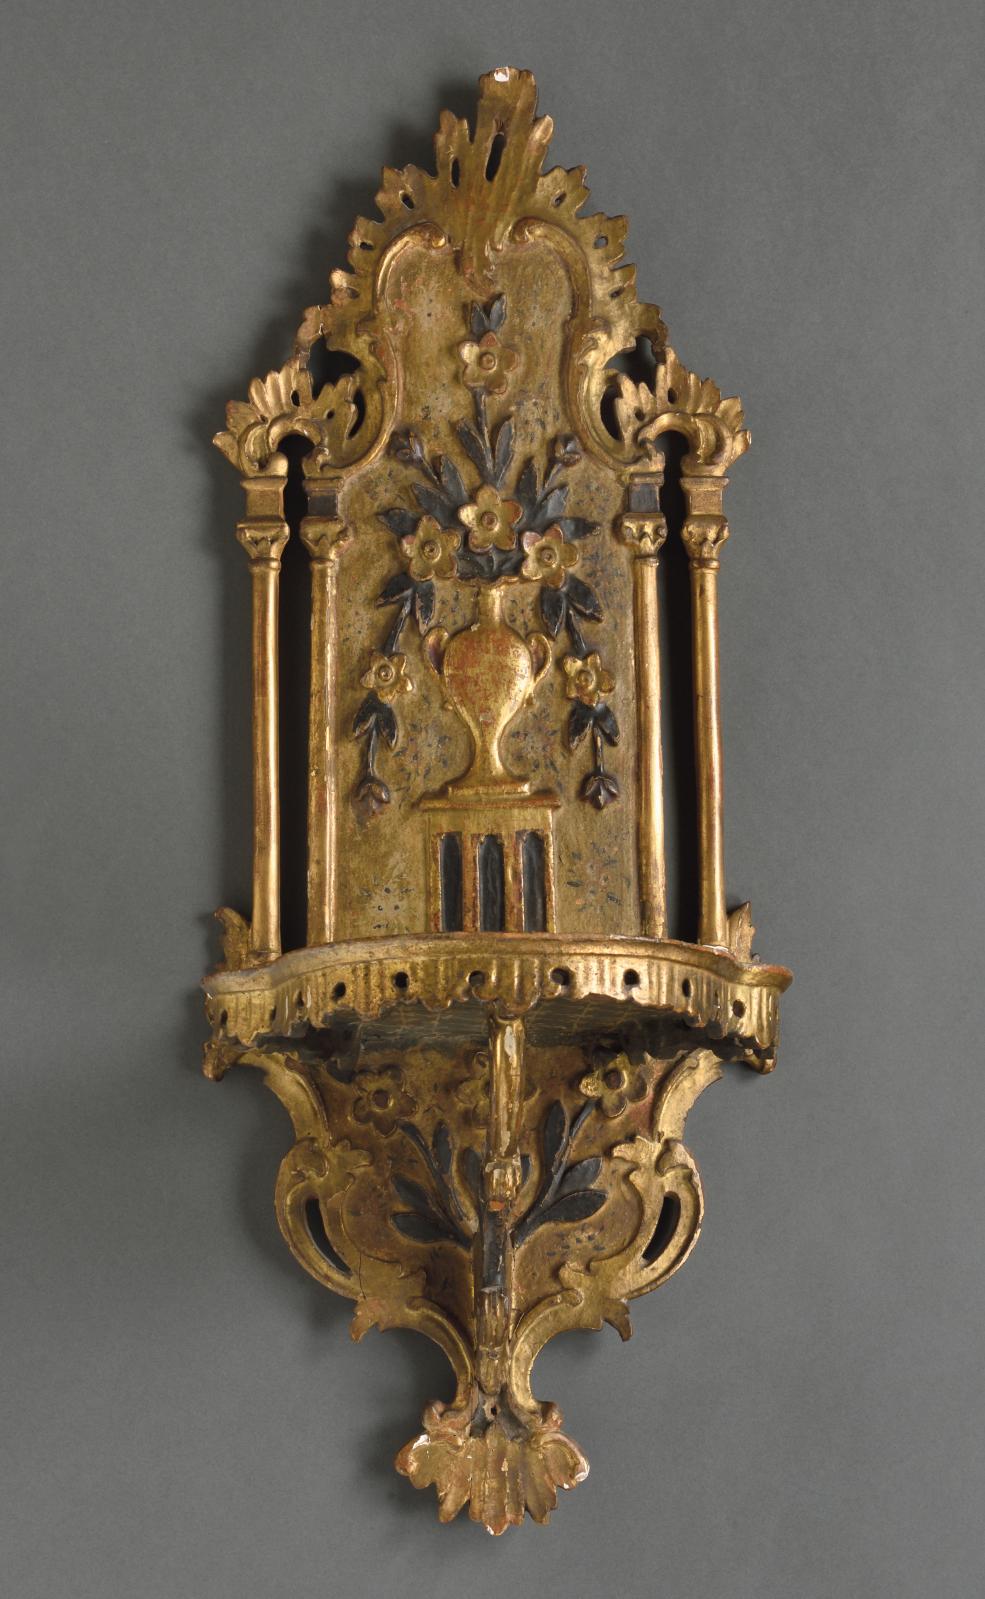 €2,125Turkey, 18th-19th century, kavukluk turban stand, gilded and lacquered carved soft wood, 79 x 31 x 6.5 cm/31.10 x 12.20 x 2.55 in.Ly